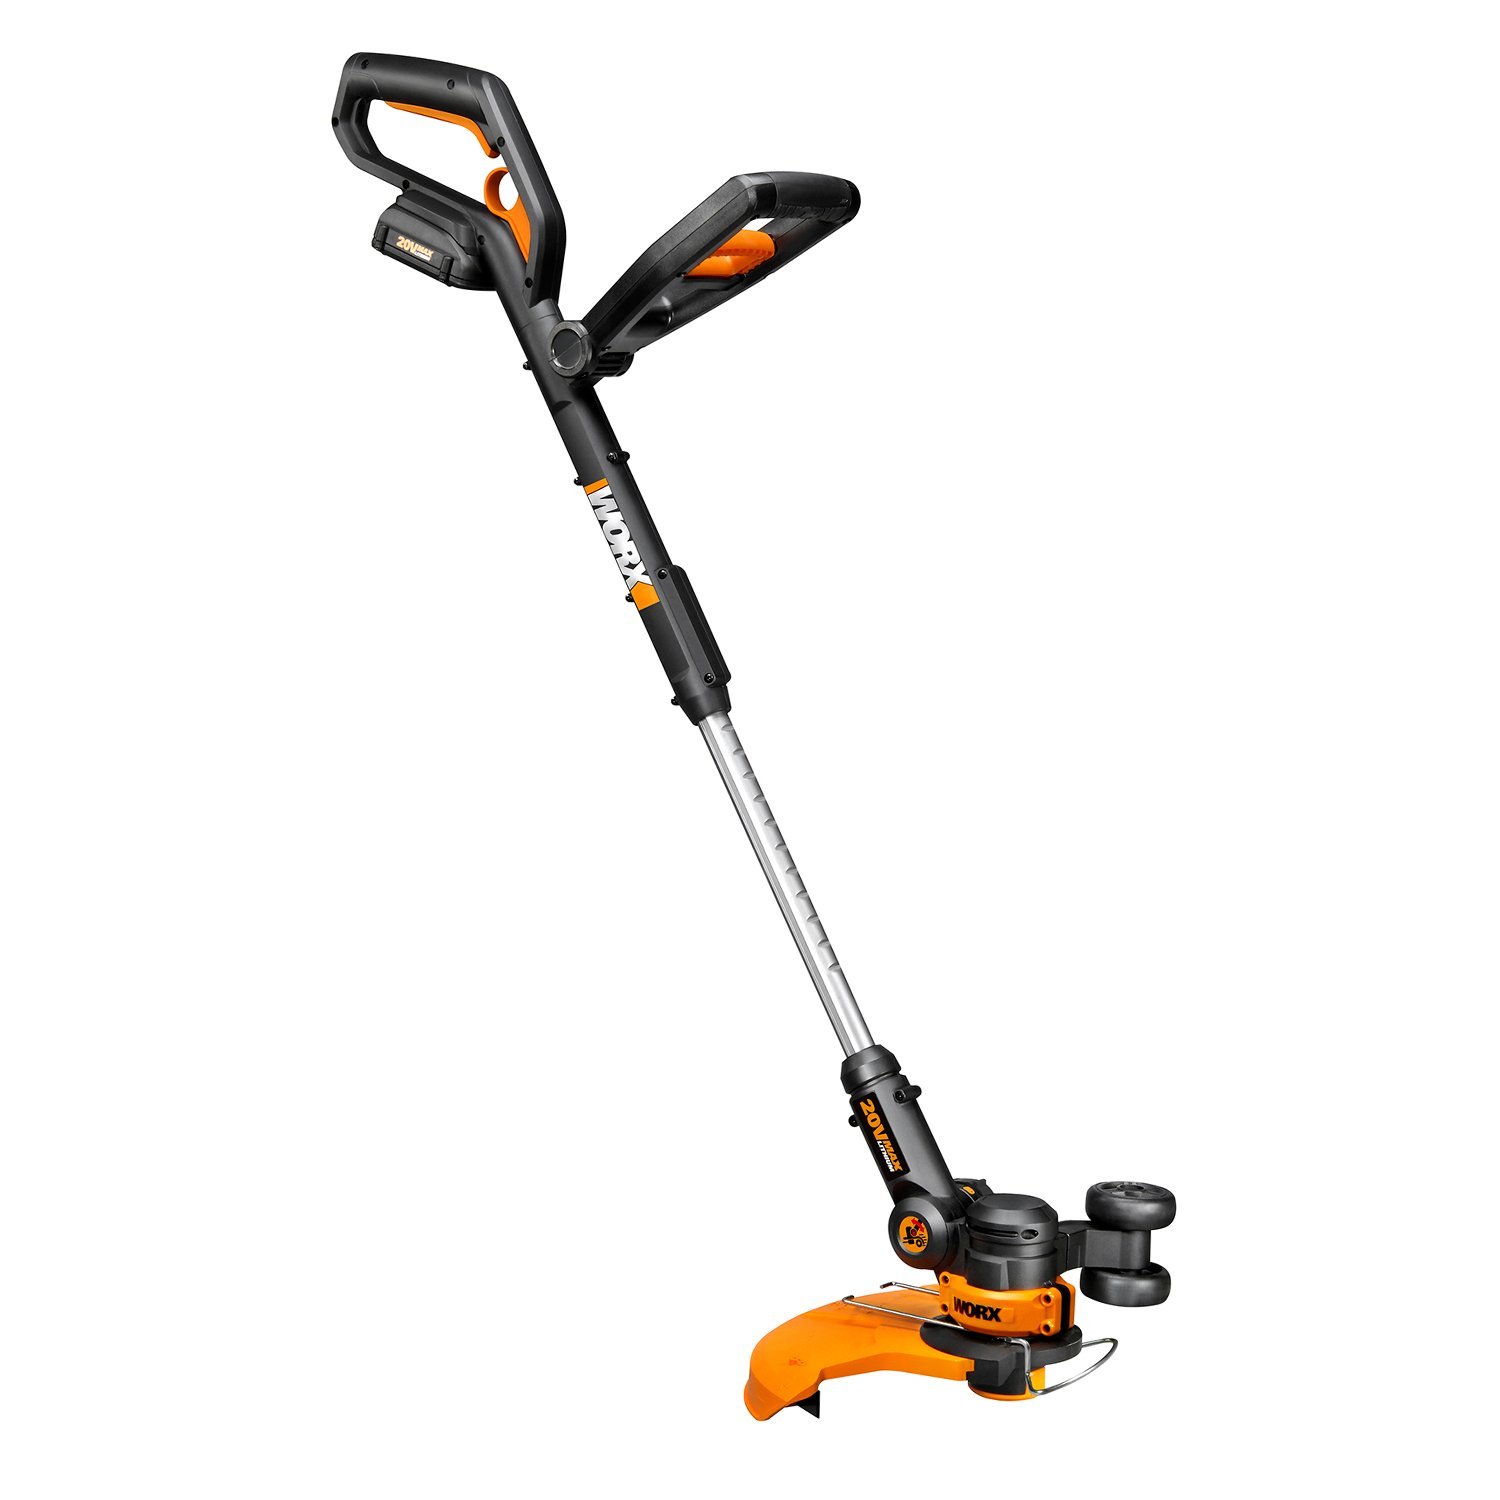 Save Big on the WORX 20V String Trimmer & Multi-Purpose Blower!